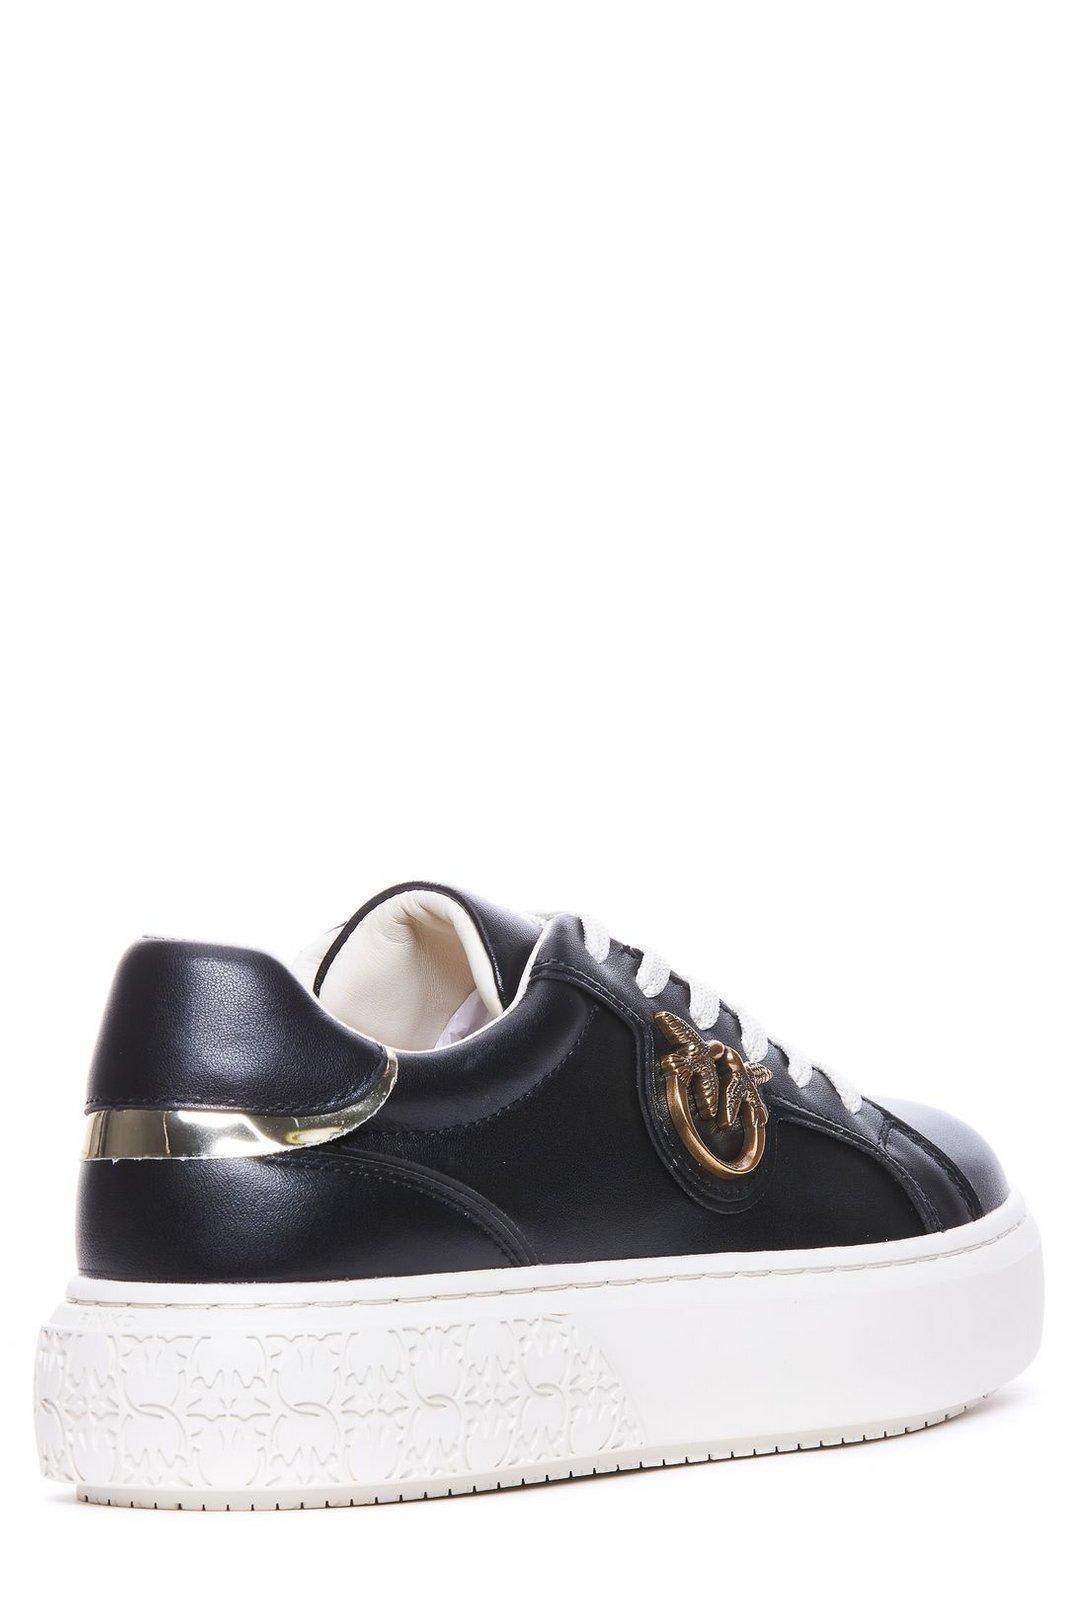 Shop Pinko Round-toe Lace-up Sneakers